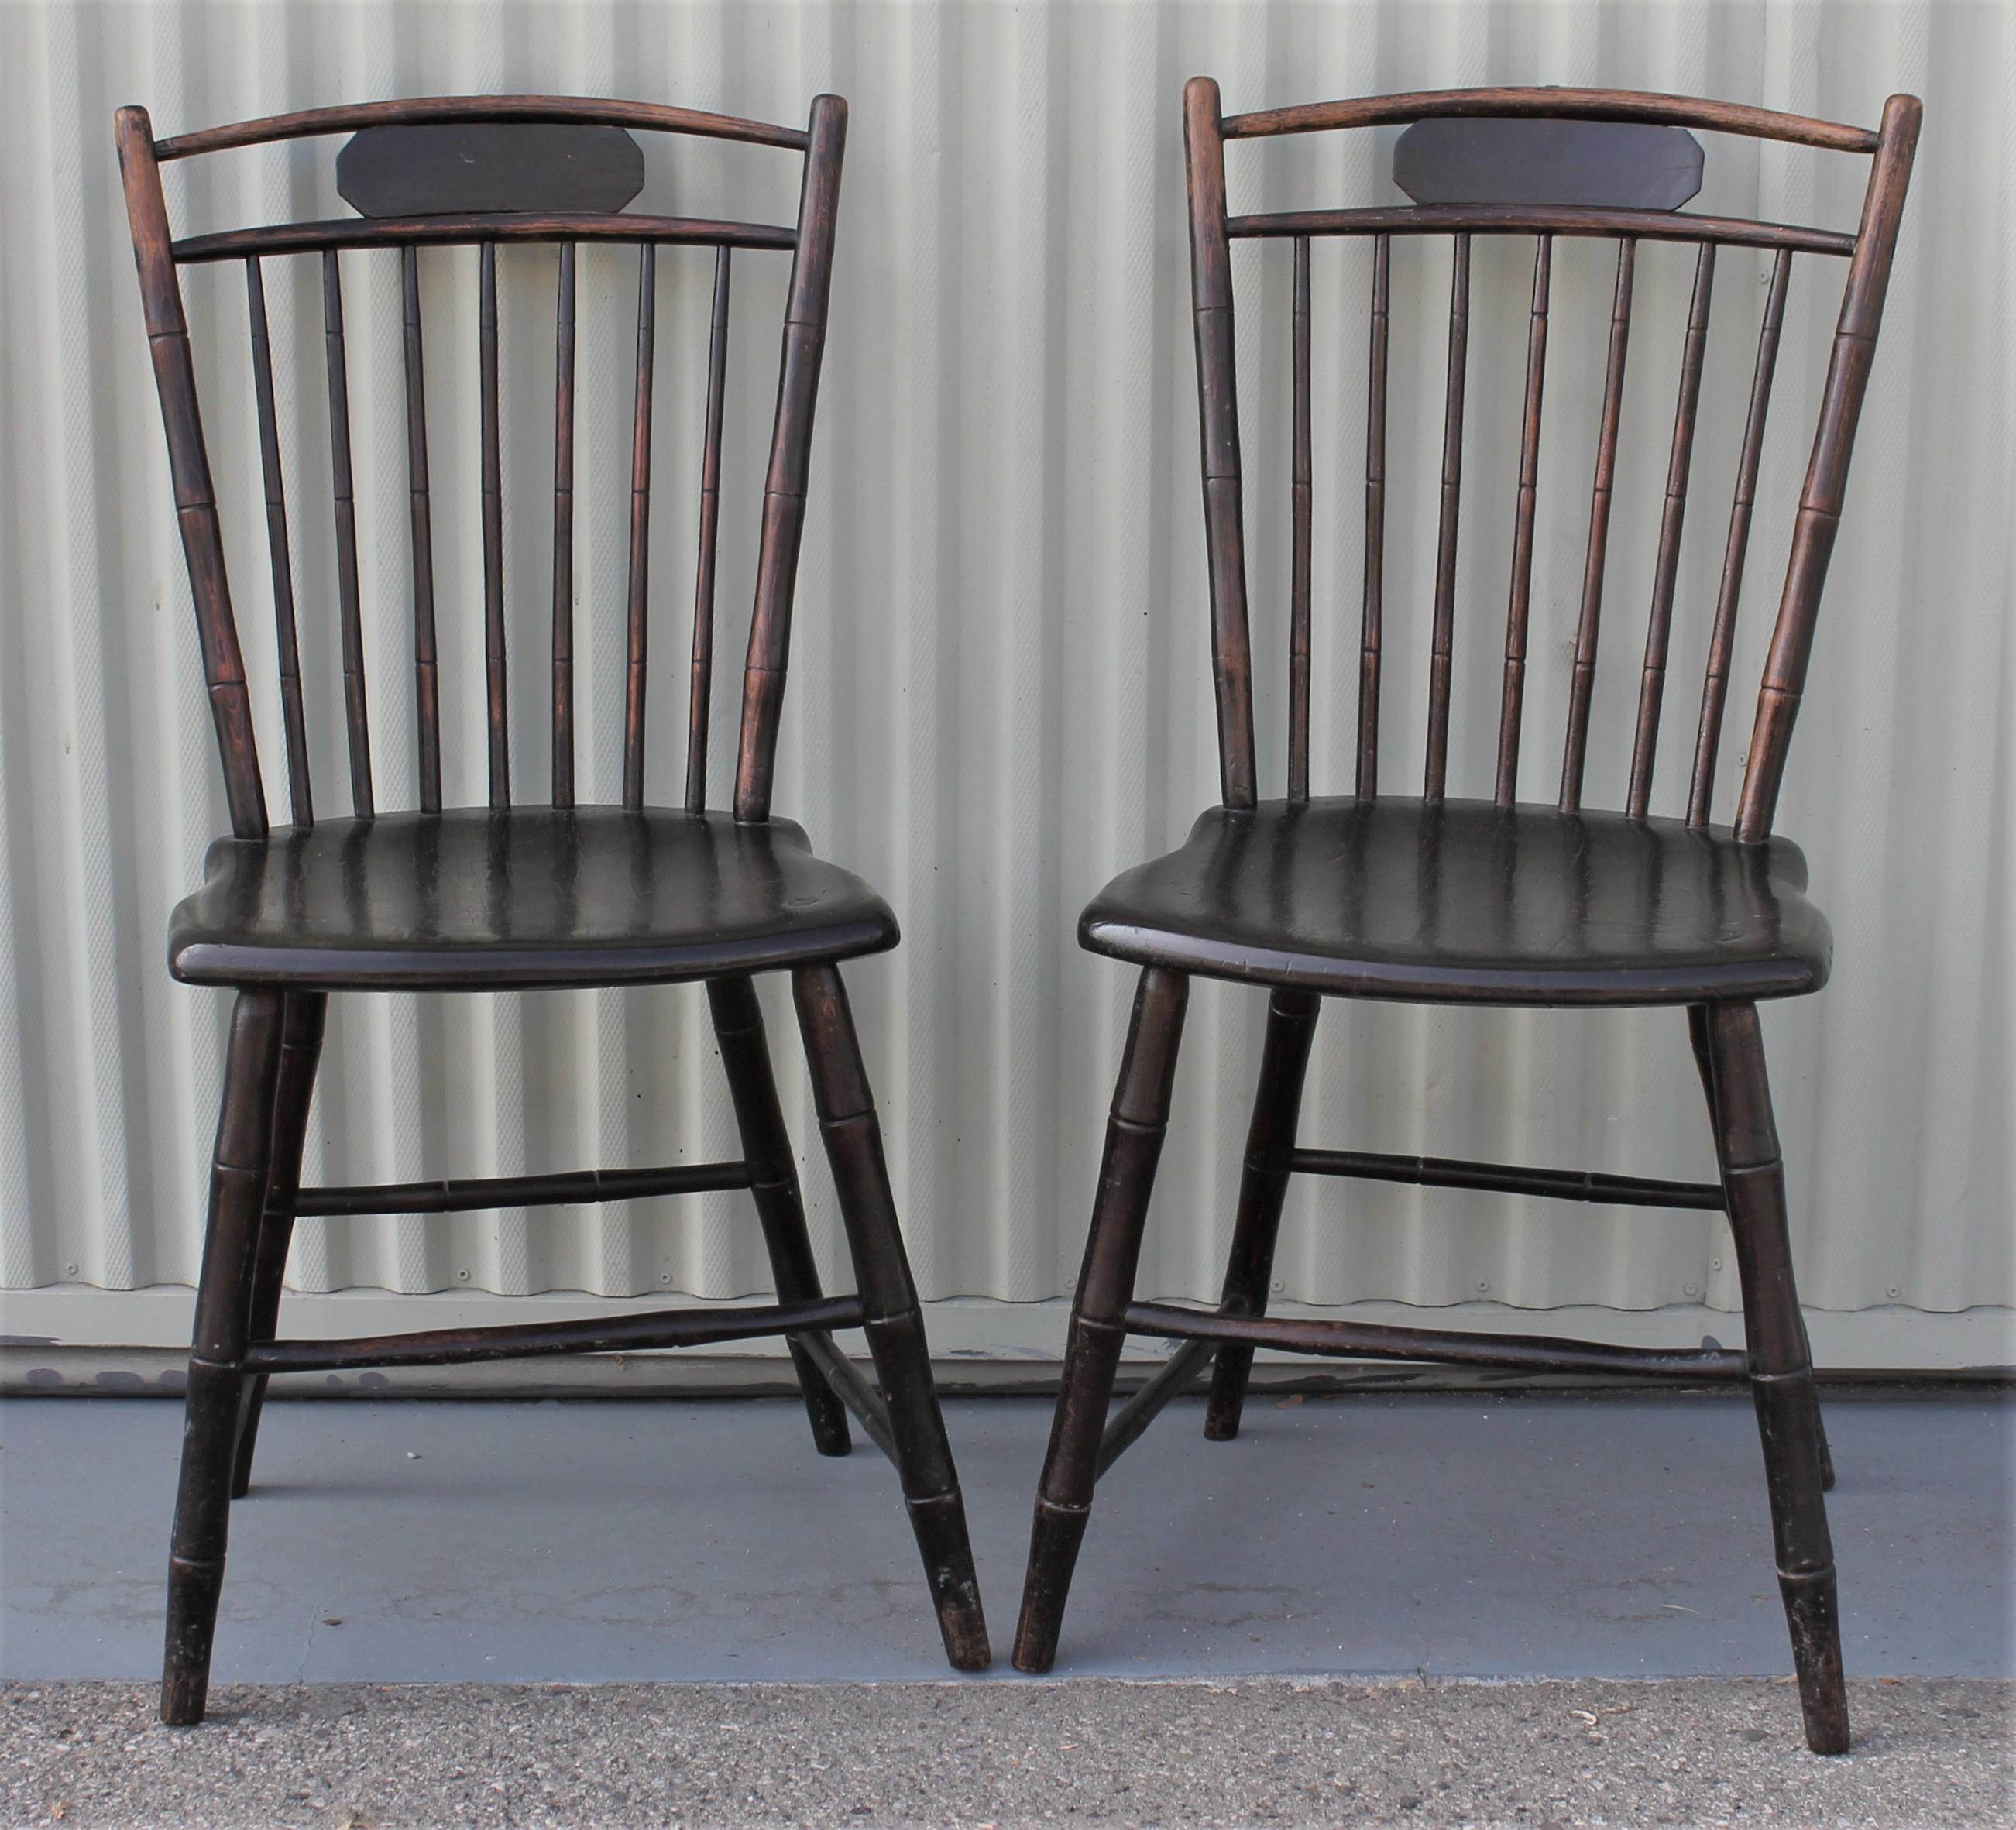 This pair of fine dark painted Windsor chairs retain their original aged patina. The condition is very good and have fantastic pegged construction. The pair are very sturdy and strong.